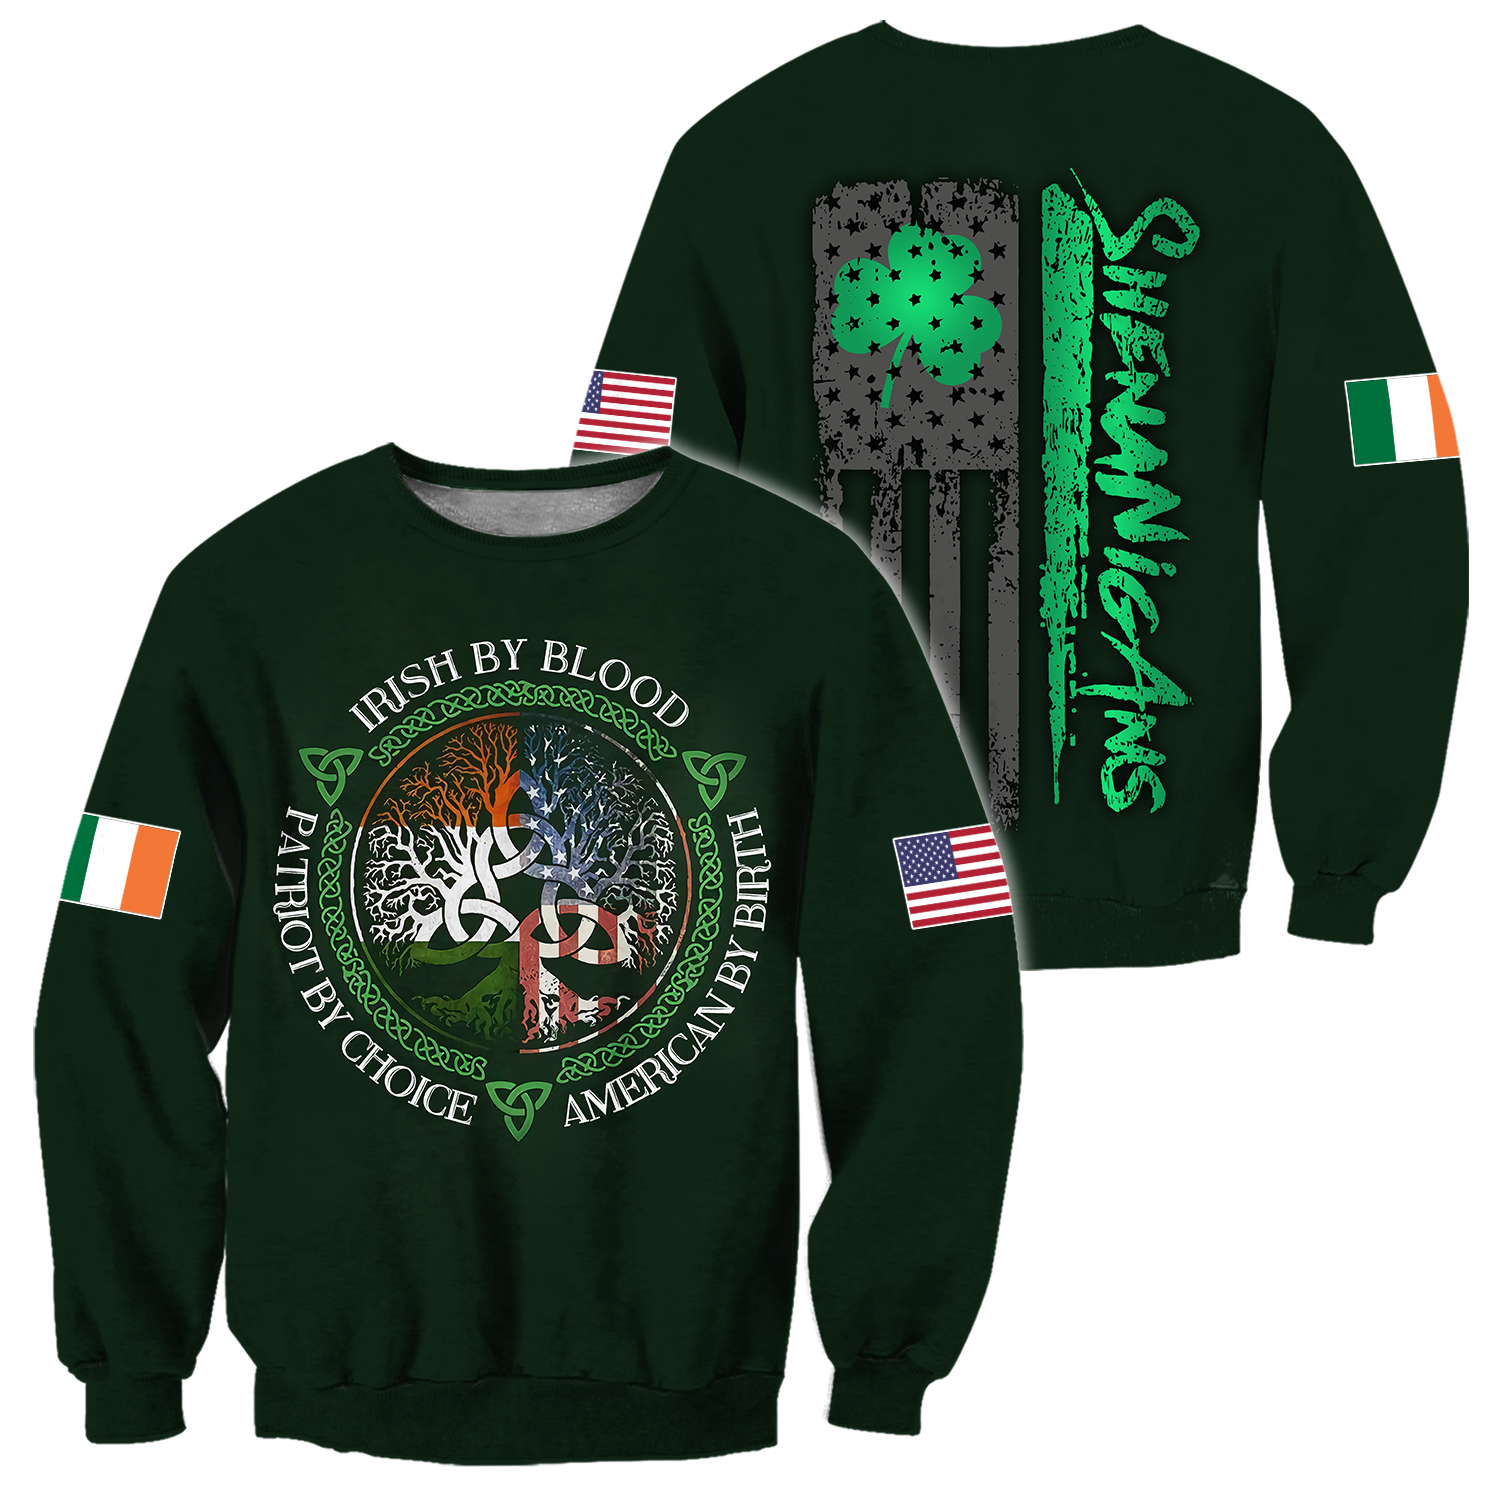 Irish By Blood American By Birth Patriot By Choice St.Patrick Day Hoodie Shirt for Men and Women